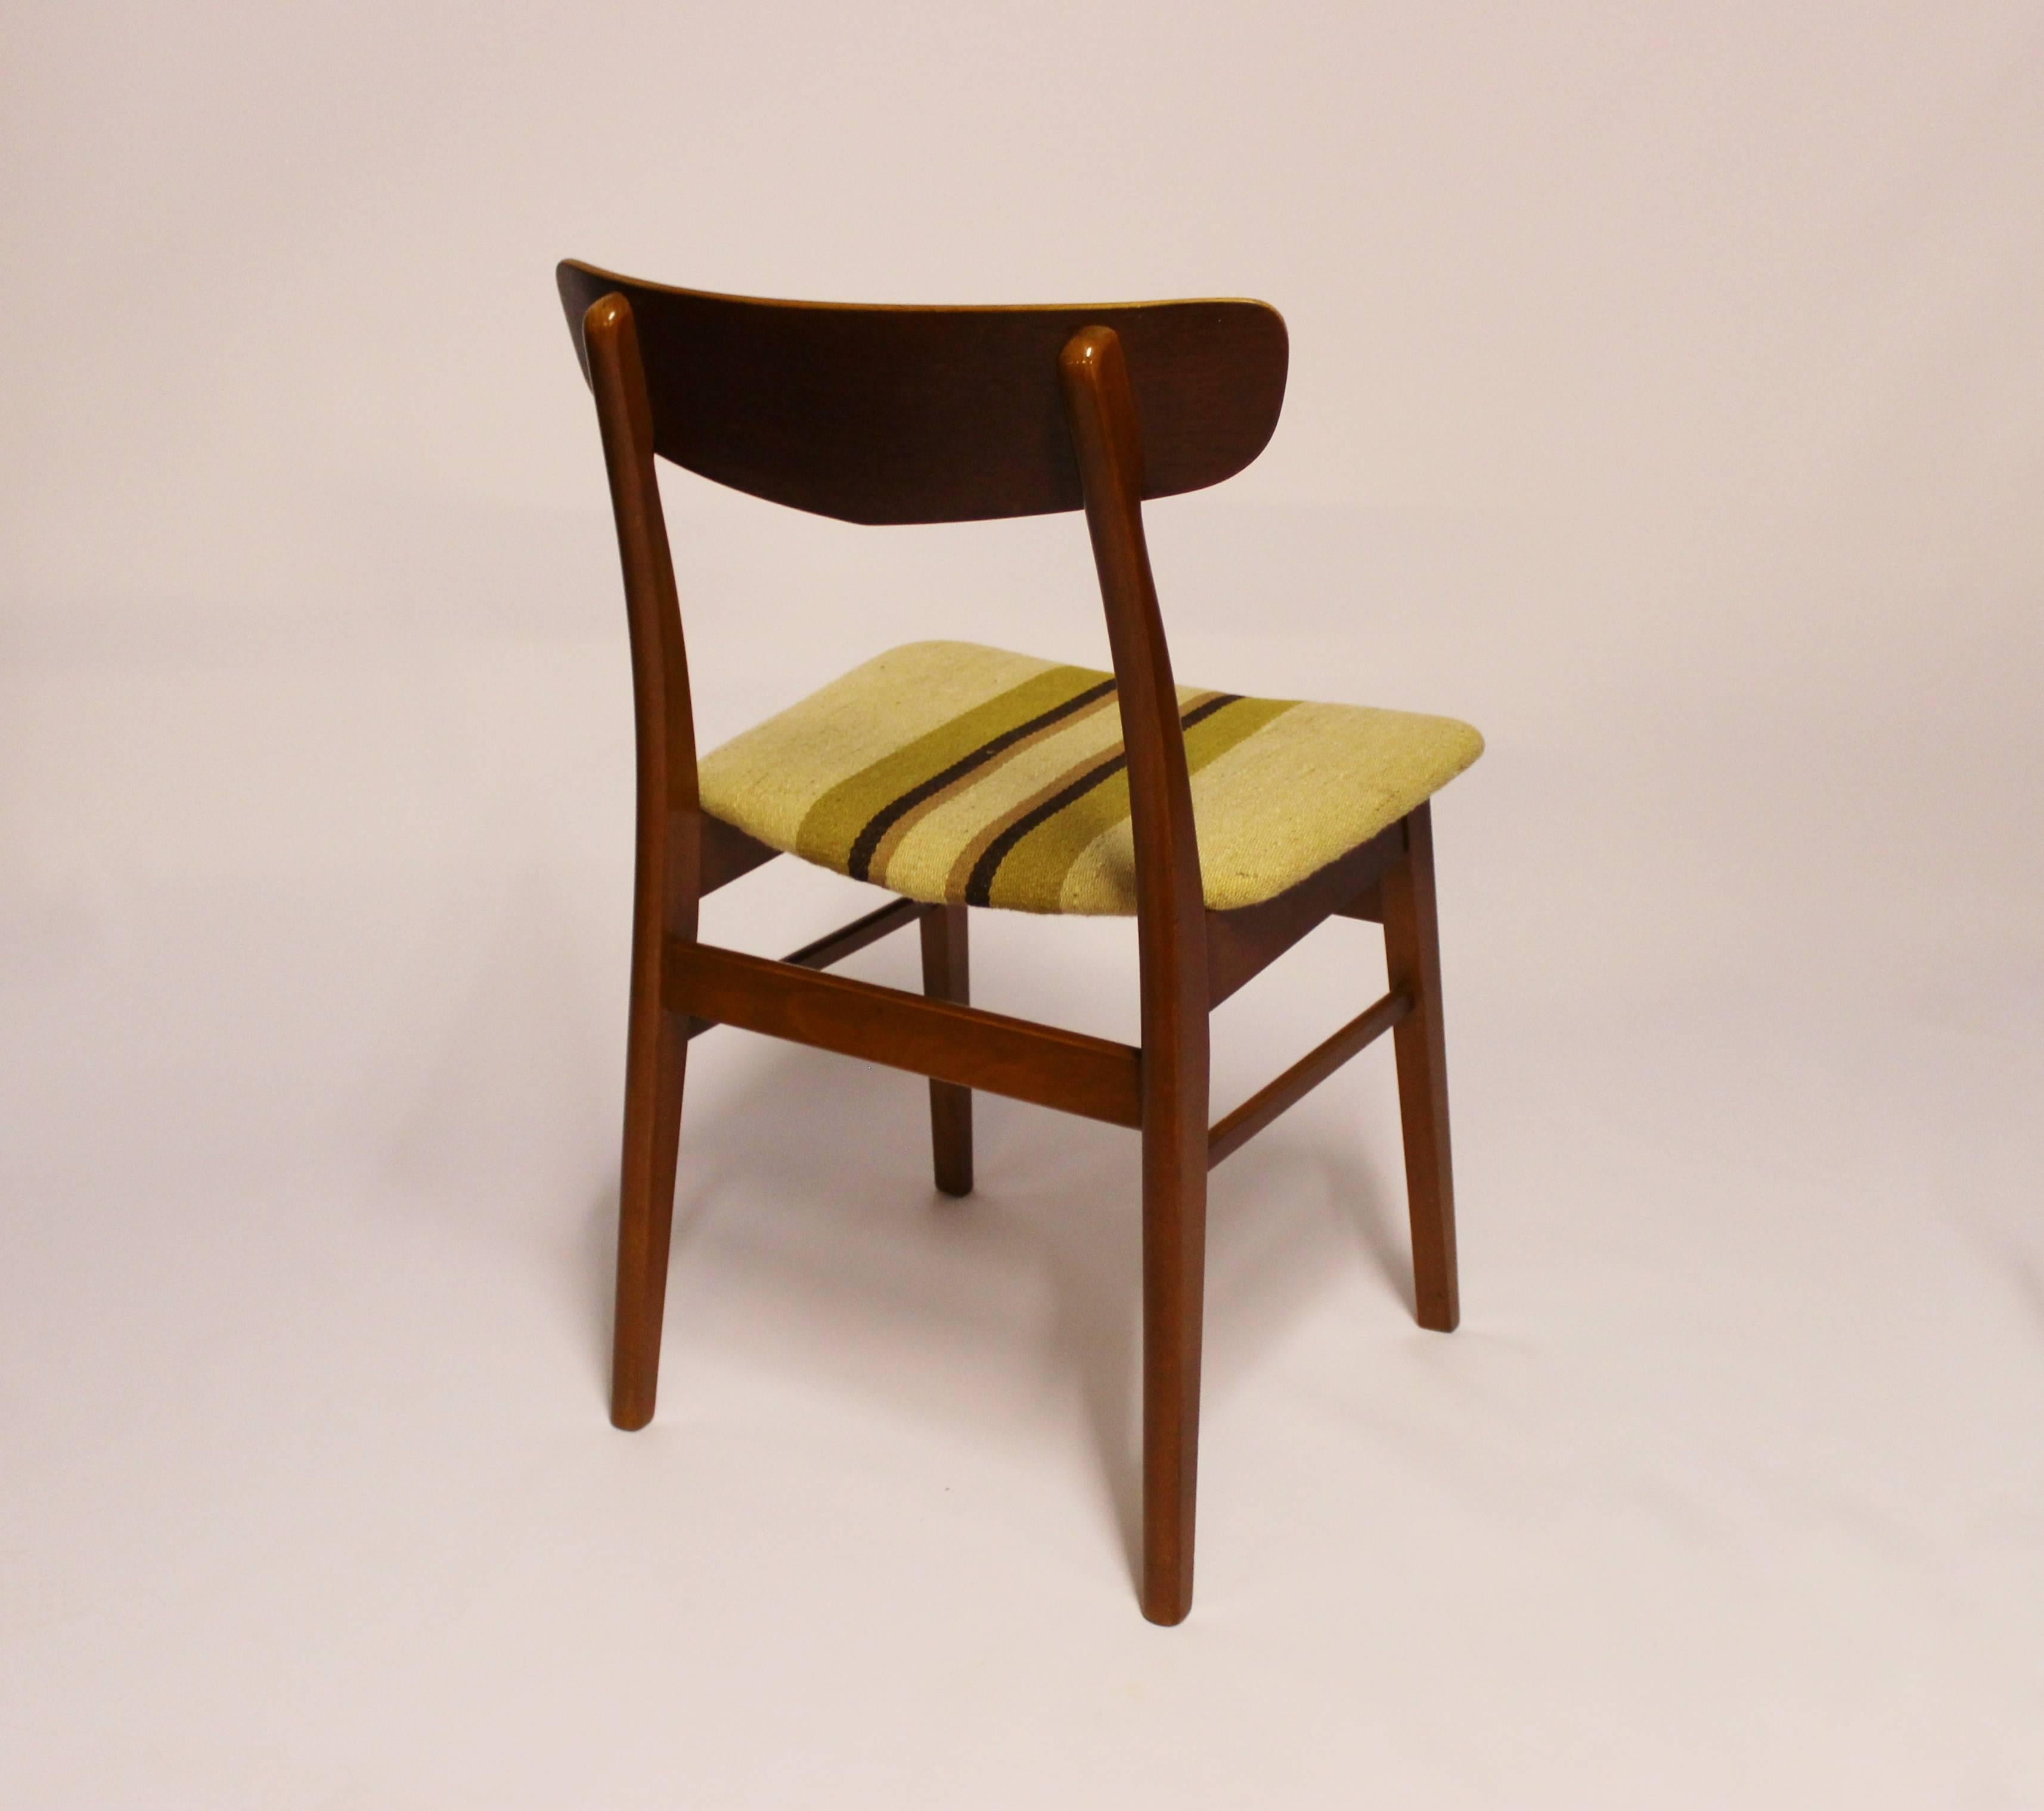 Oiled Scandinavian Modern Set of Six Dining Chairs in Teak from the 1960s For Sale